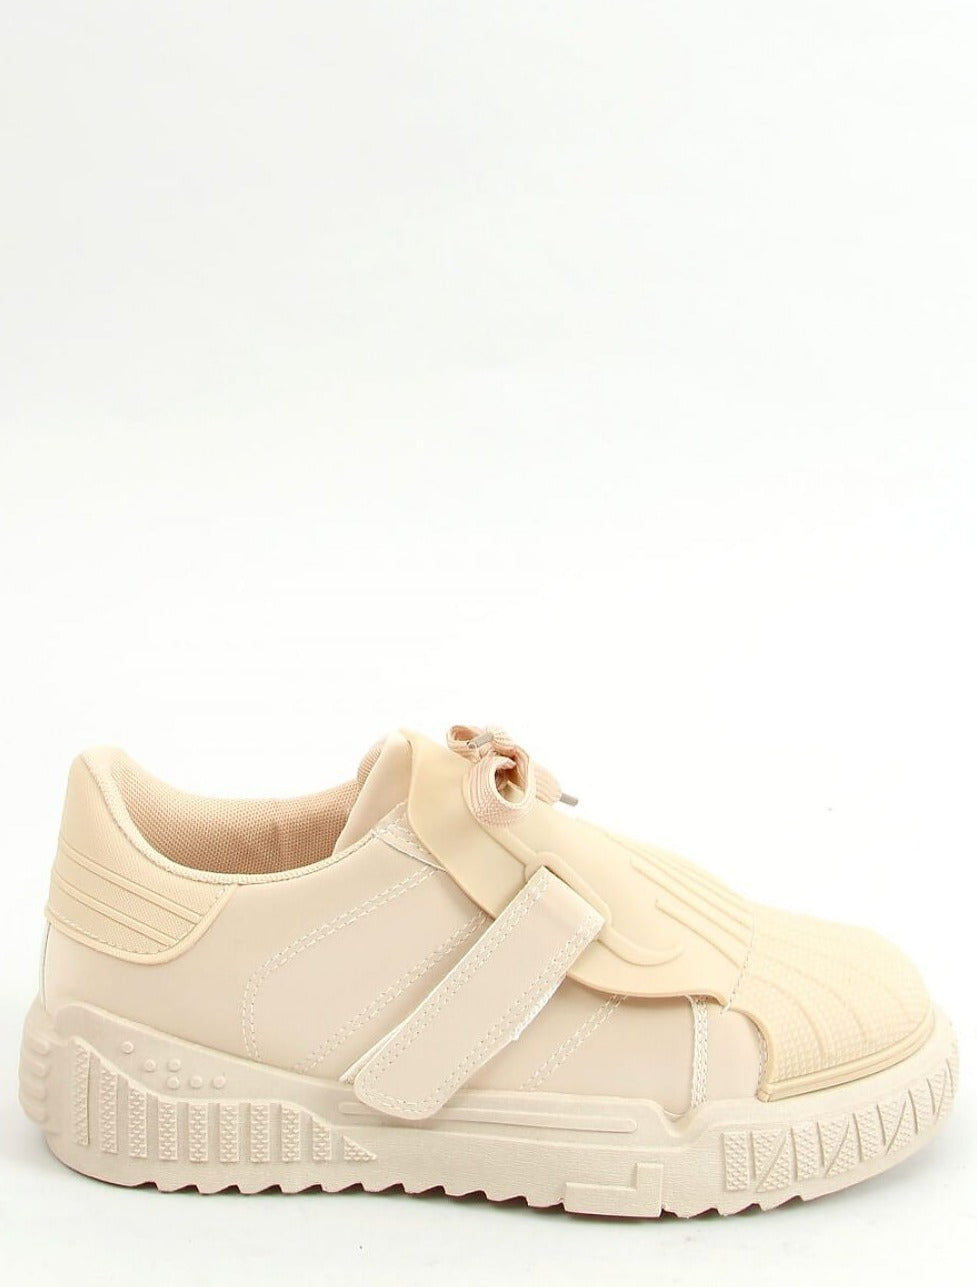 TEEK - Cream Laced Solid Ip Moccasin Sneakers SHOES TEEK MH 5.5  